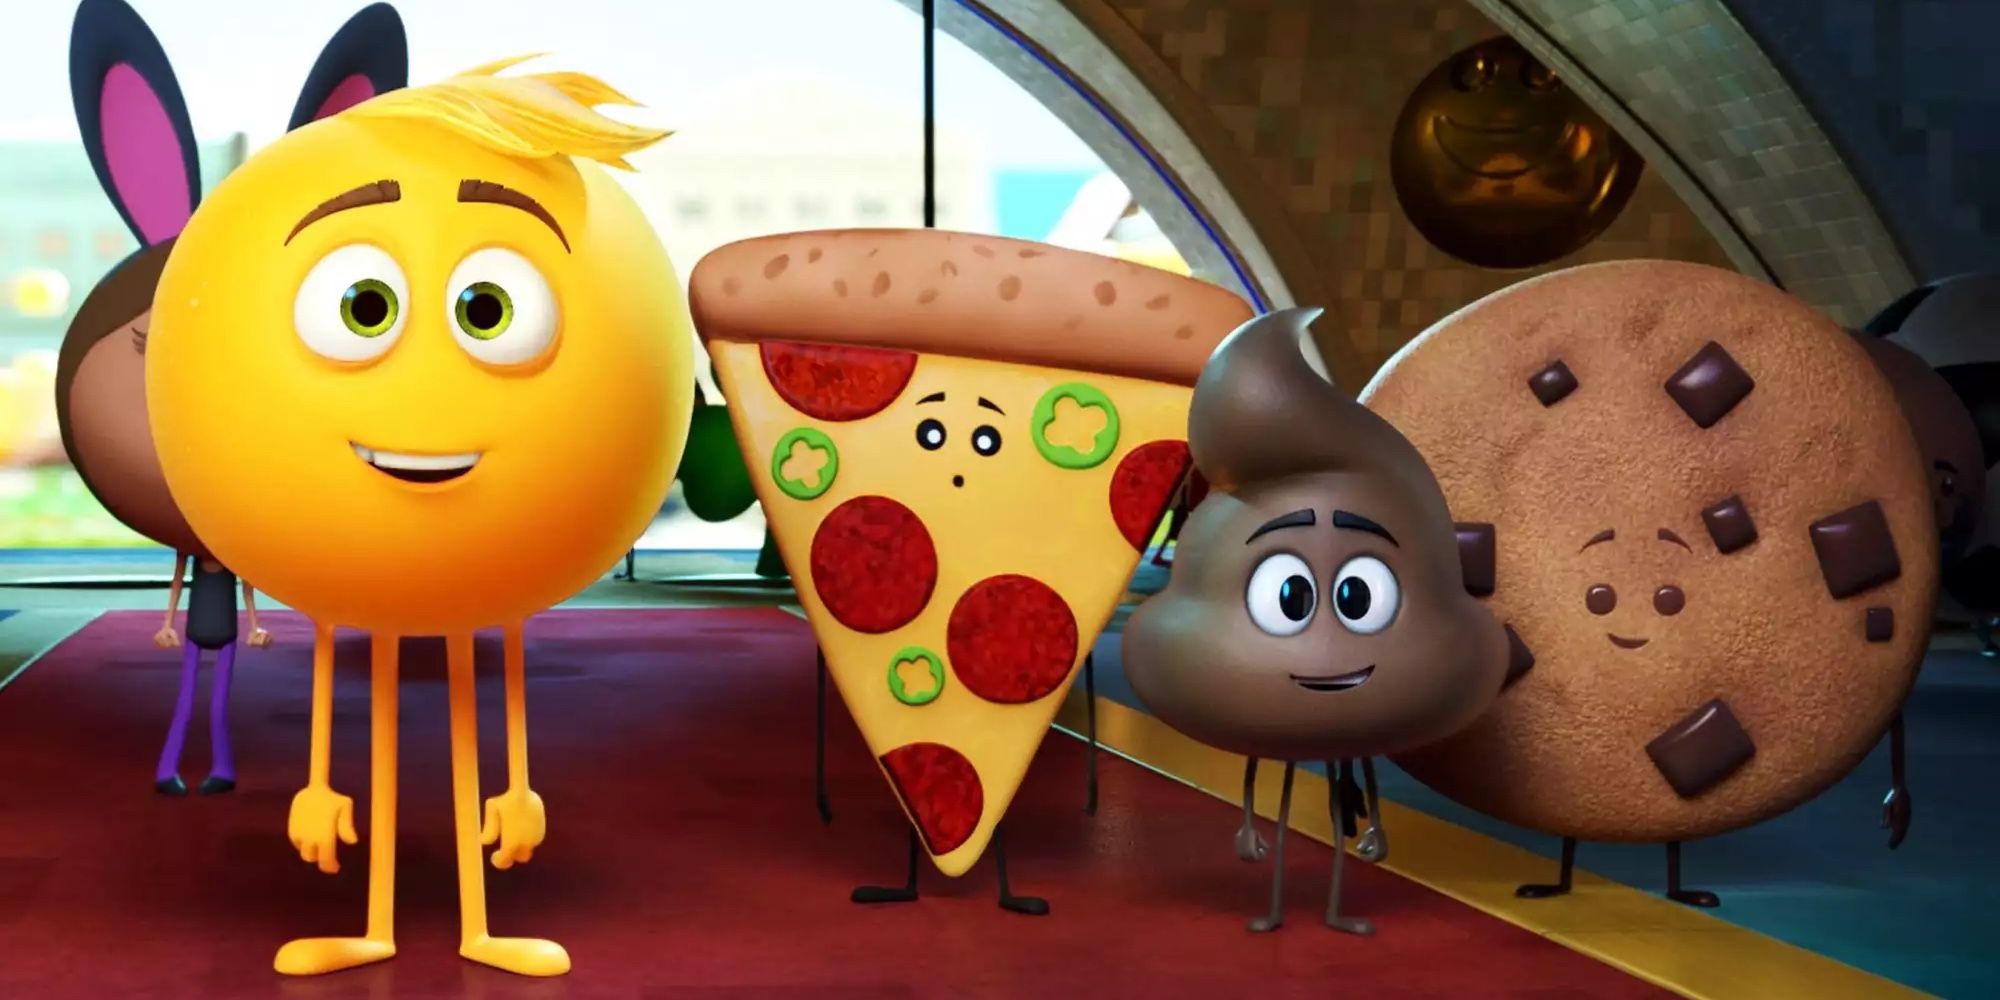 The main characters of The Emoji Movie